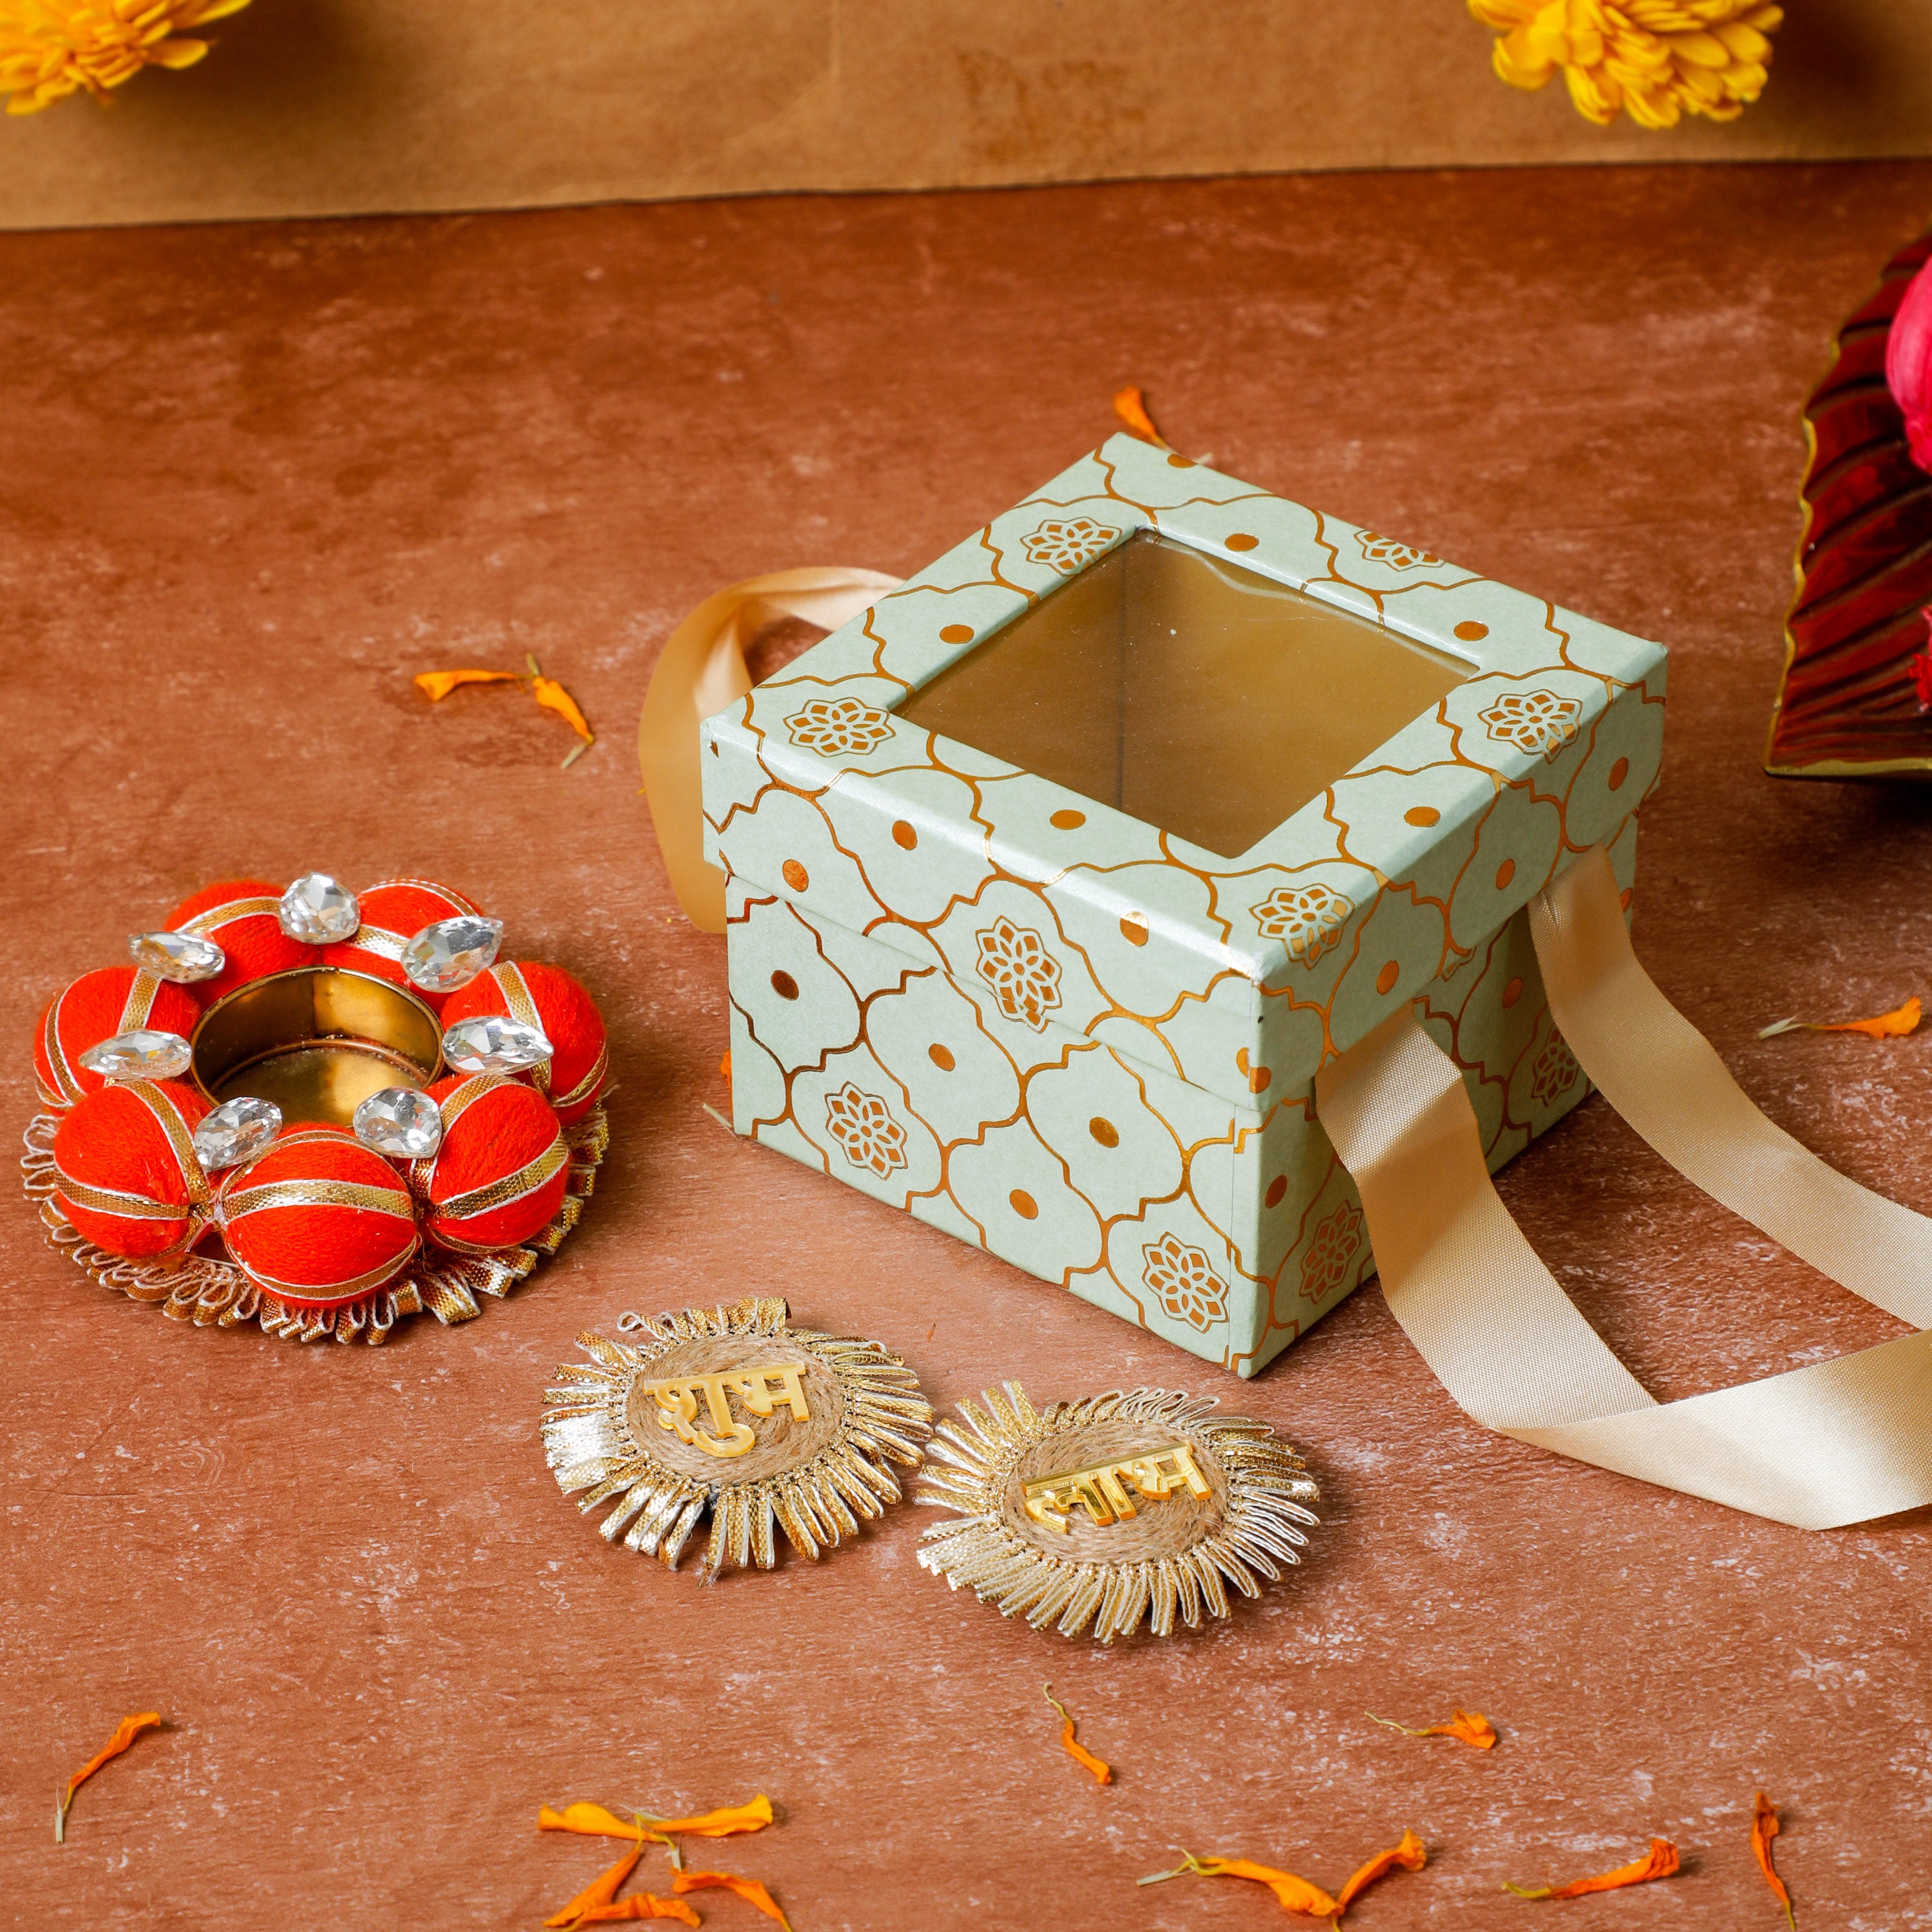 7 Thoughtful Diwali Gifts for Your in-laws